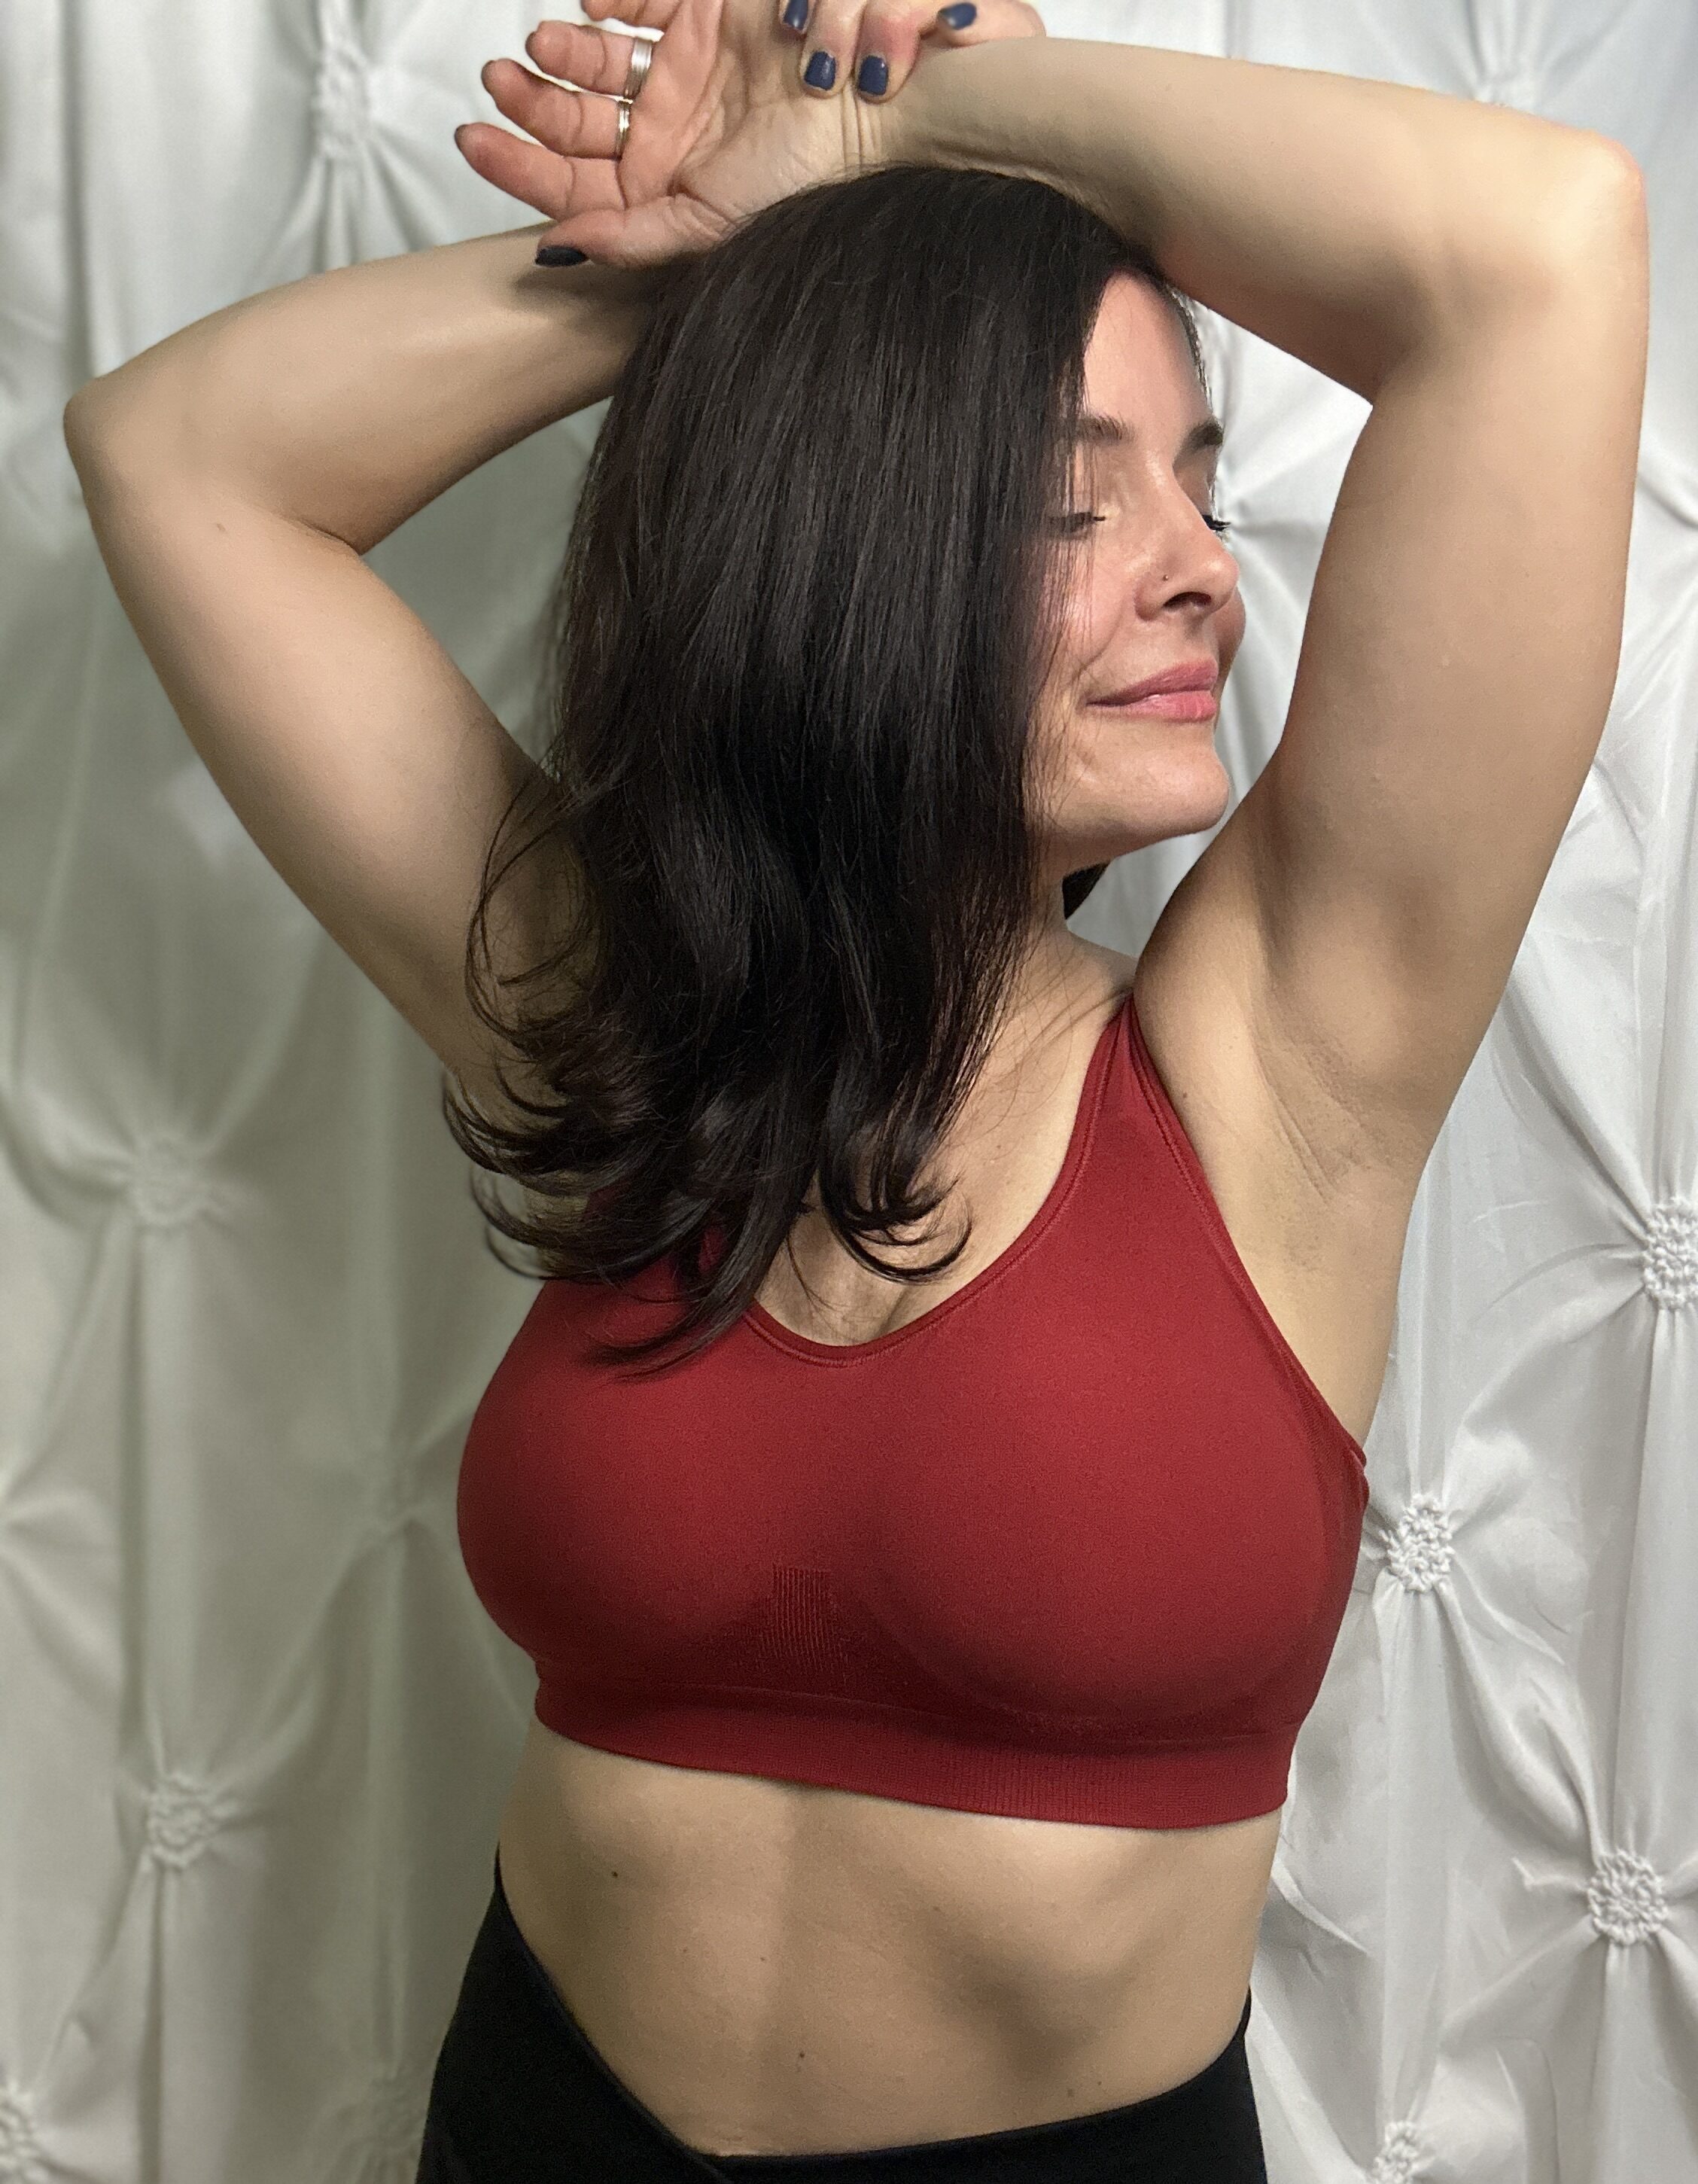 Essential Bodywear MLM Review - Is There Money in Underwear?